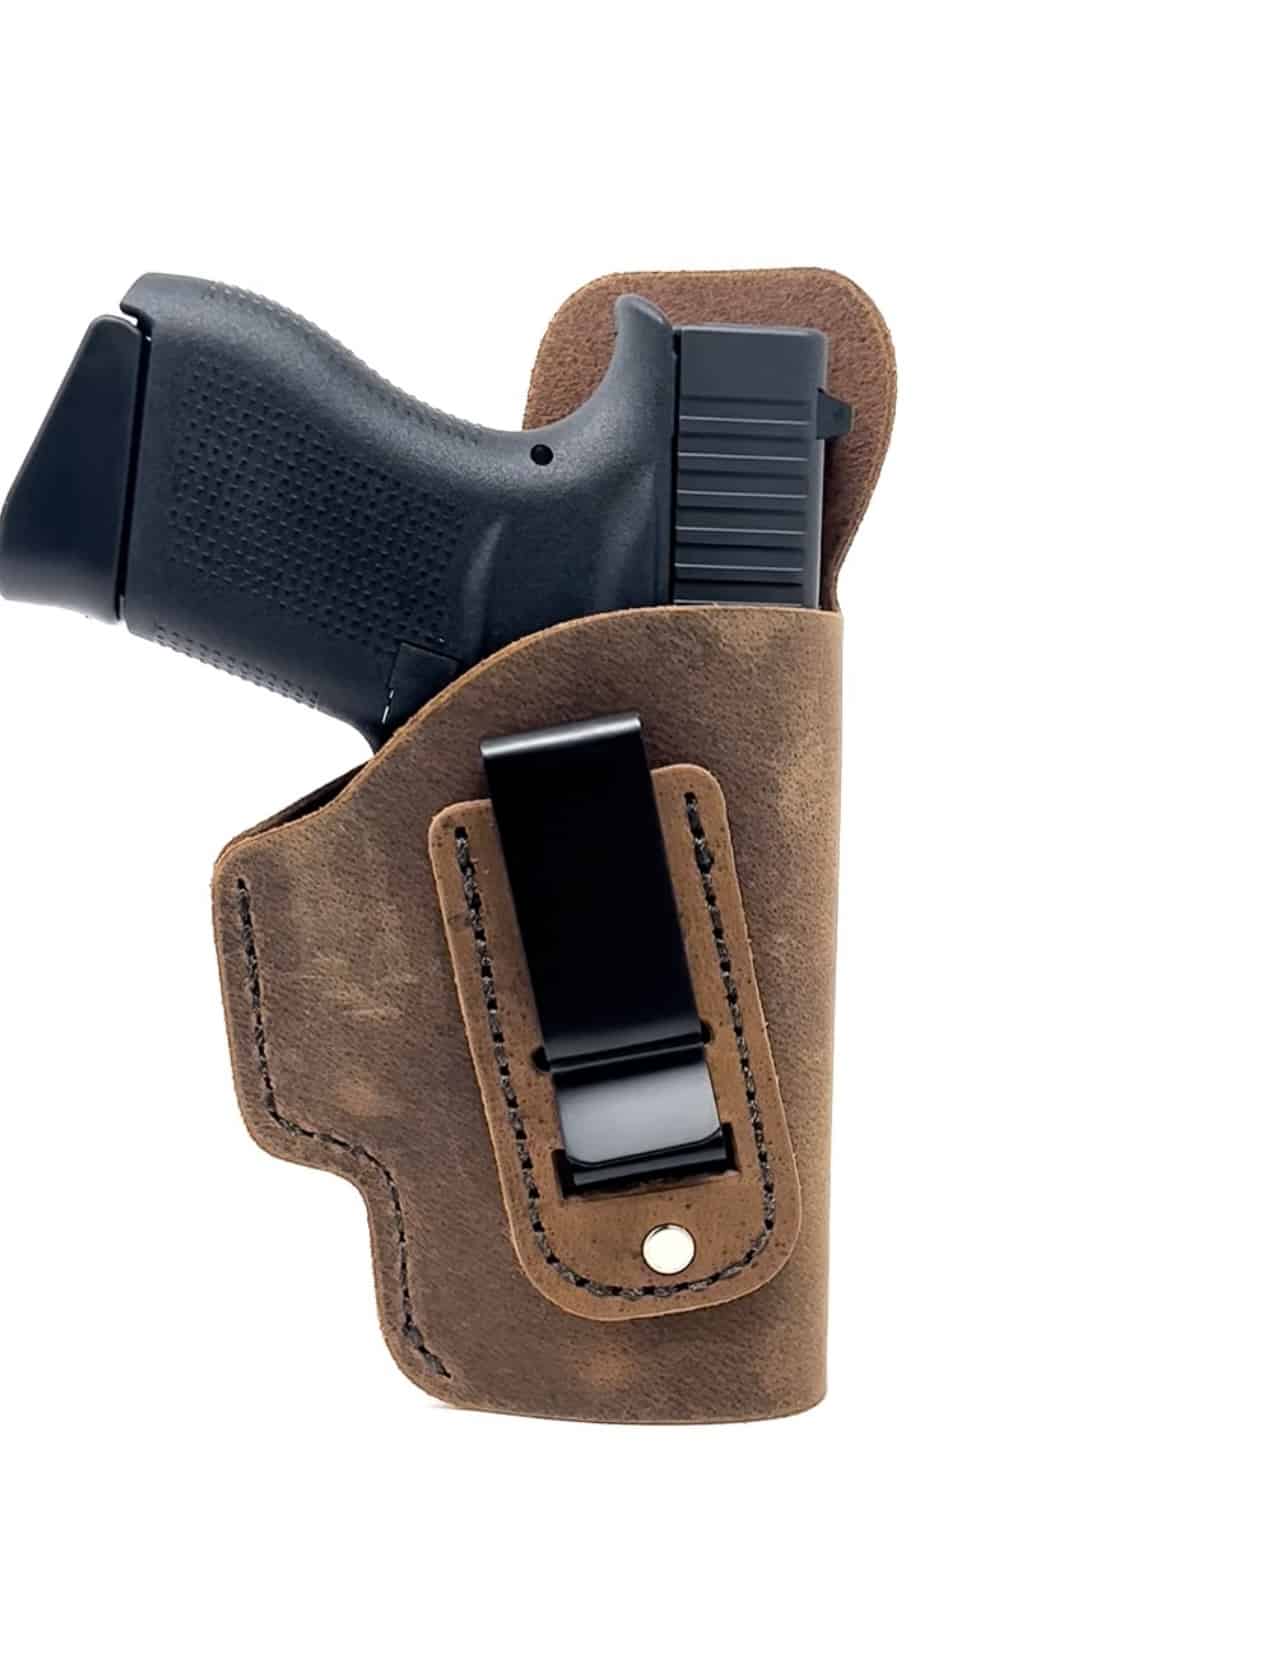 PRO TACTICAL GUN HOLSTER CONCEALED CARRY IWB OWB FOR KAHR CM9 9mm 